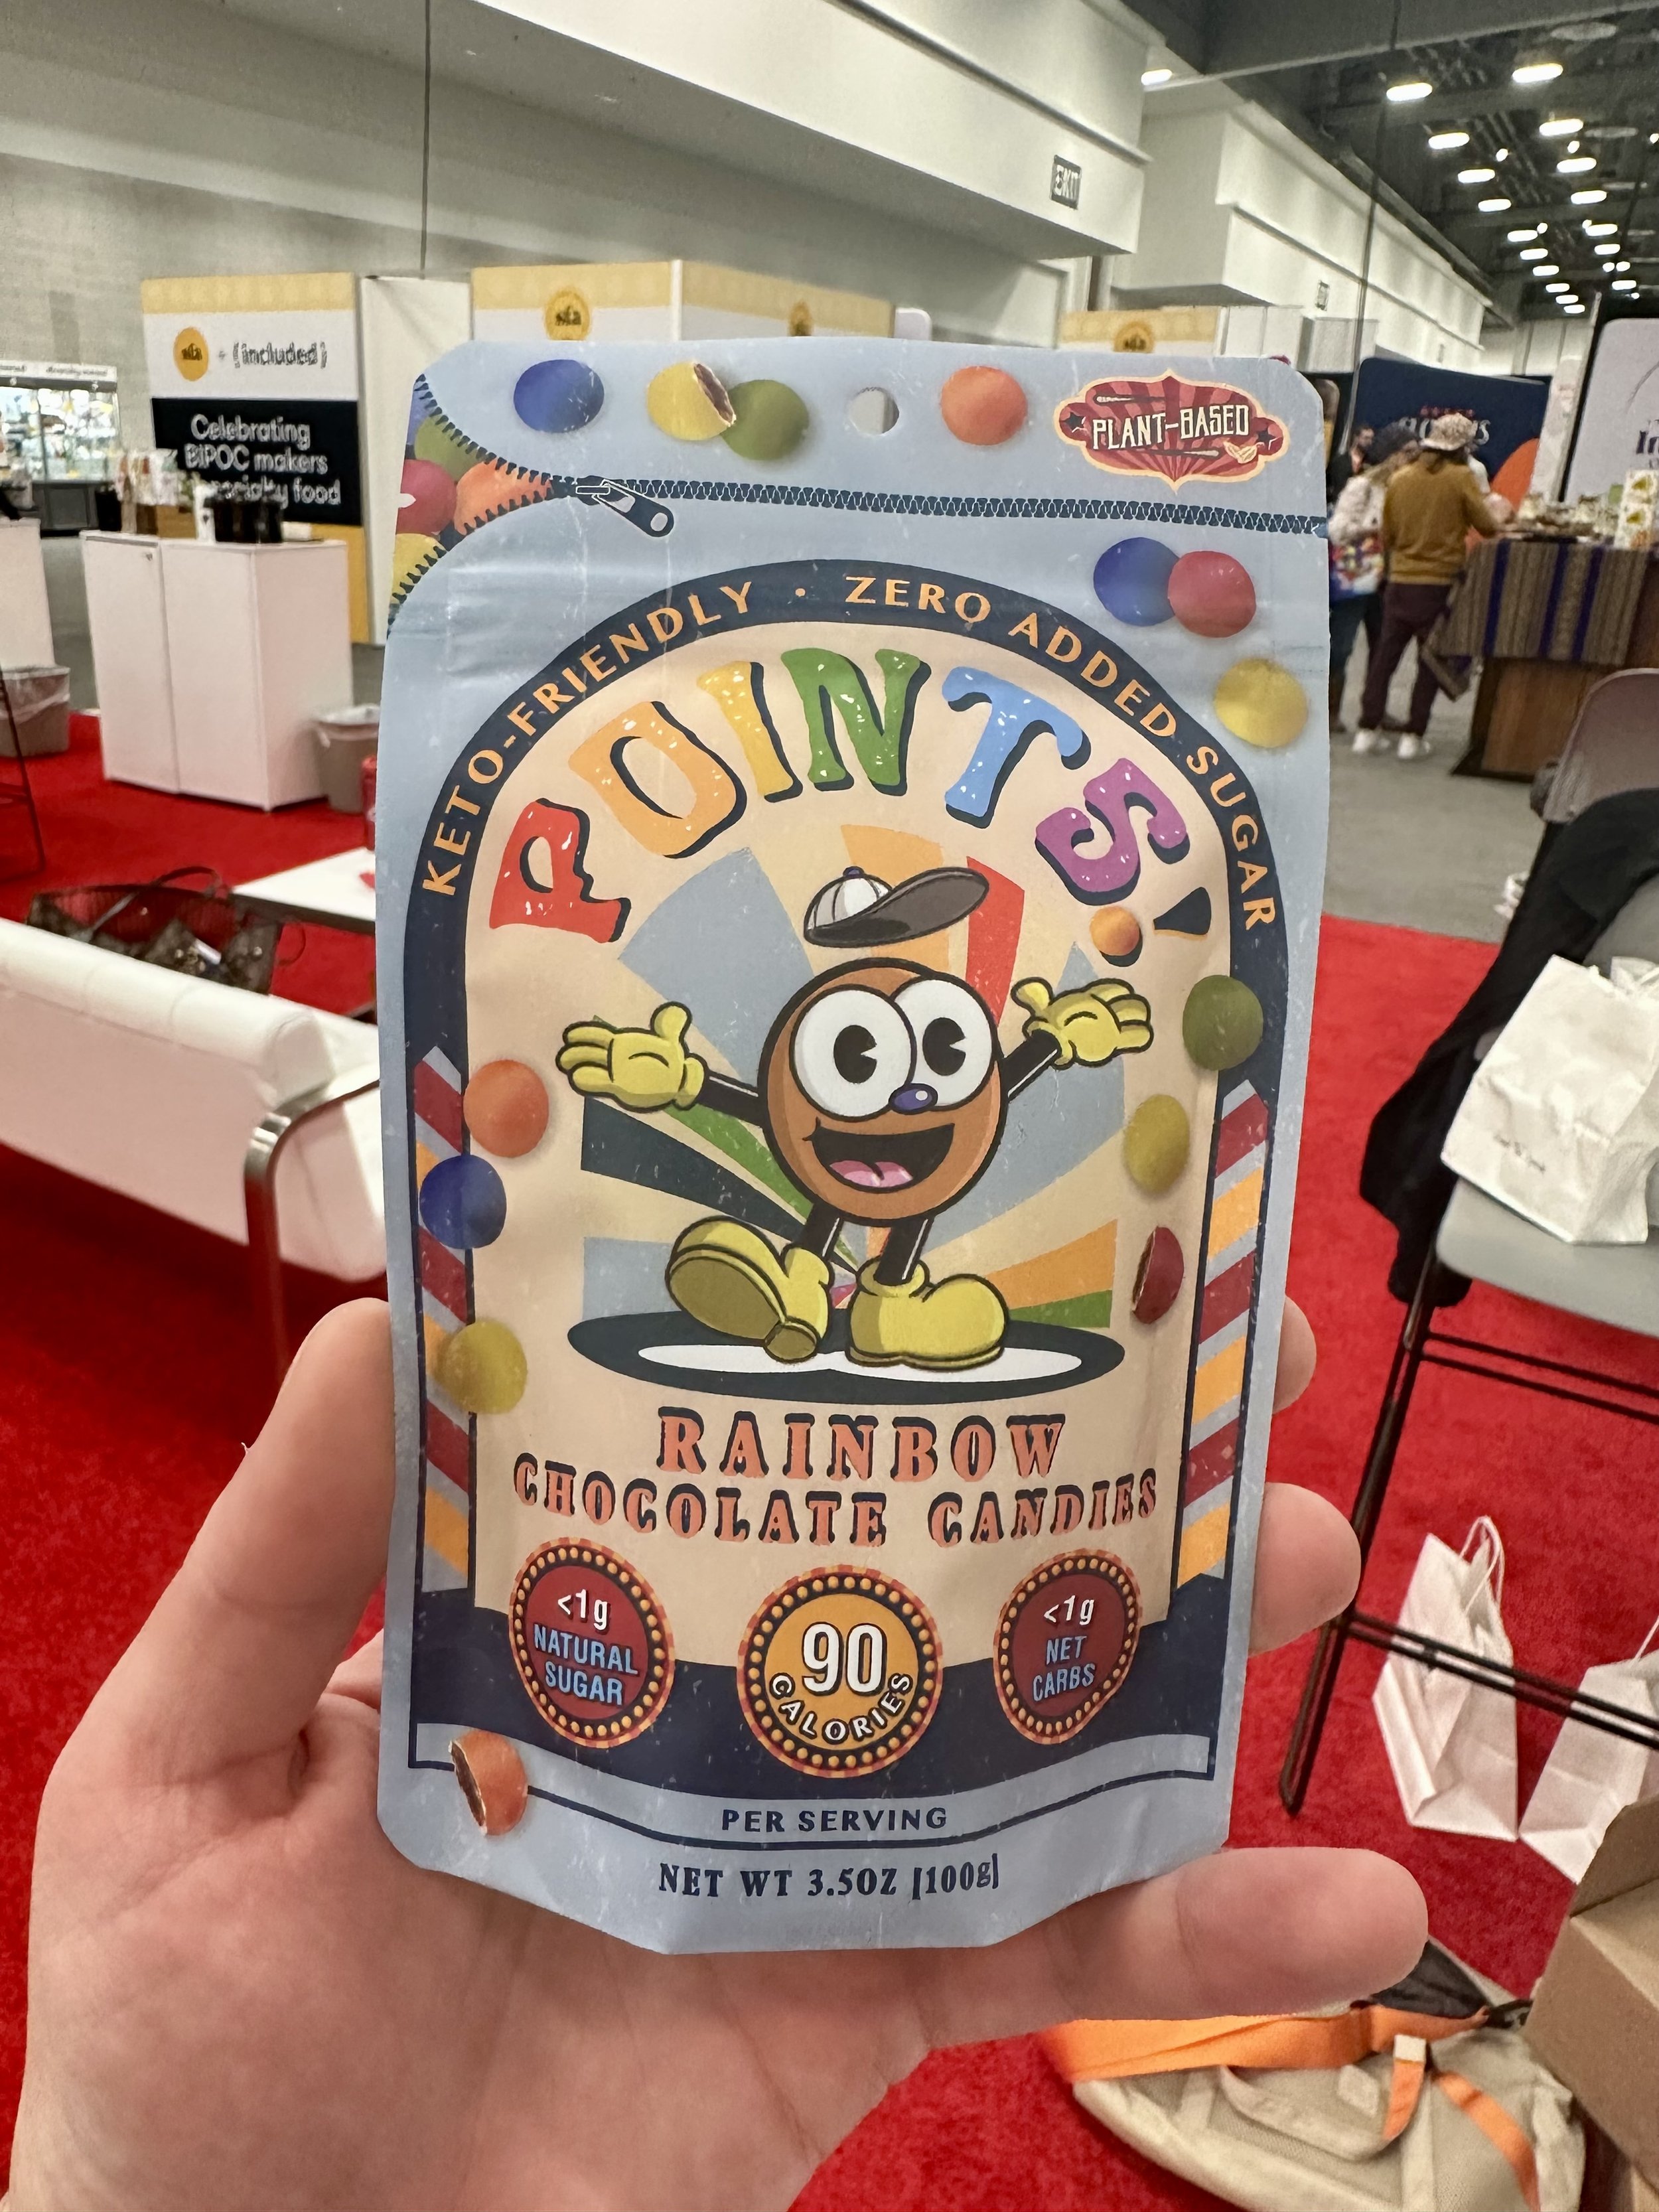 32 New Vegan Products We Discovered at the Winter Fancy Food Show